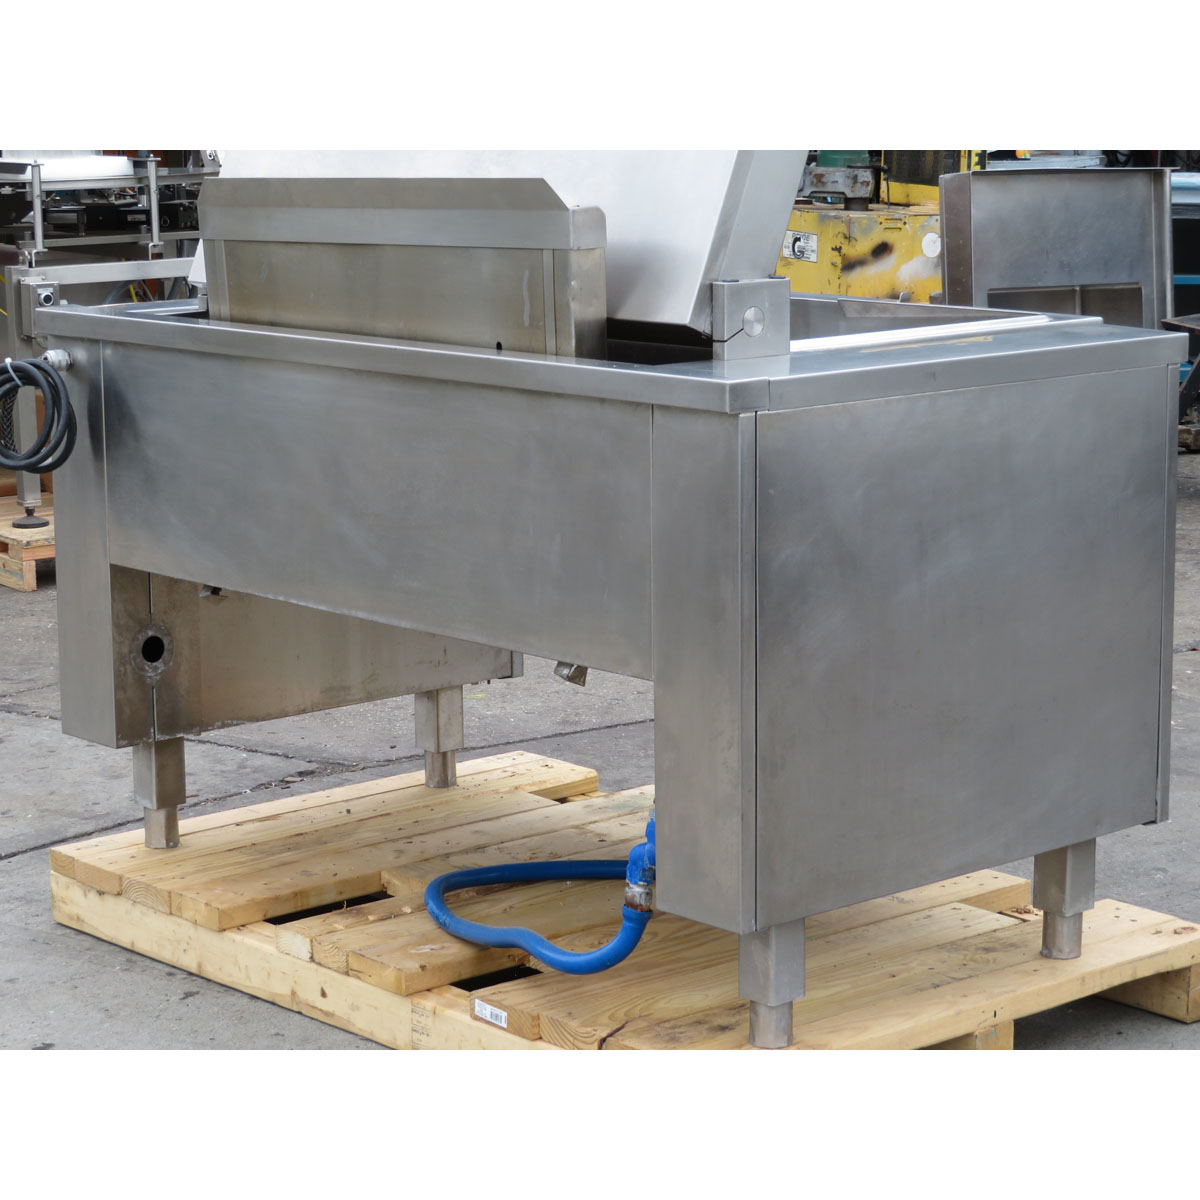 Electrolux 583402 Gas Tilting Pressure Braising Pan 40 Gallon, Used Good Condition image 5